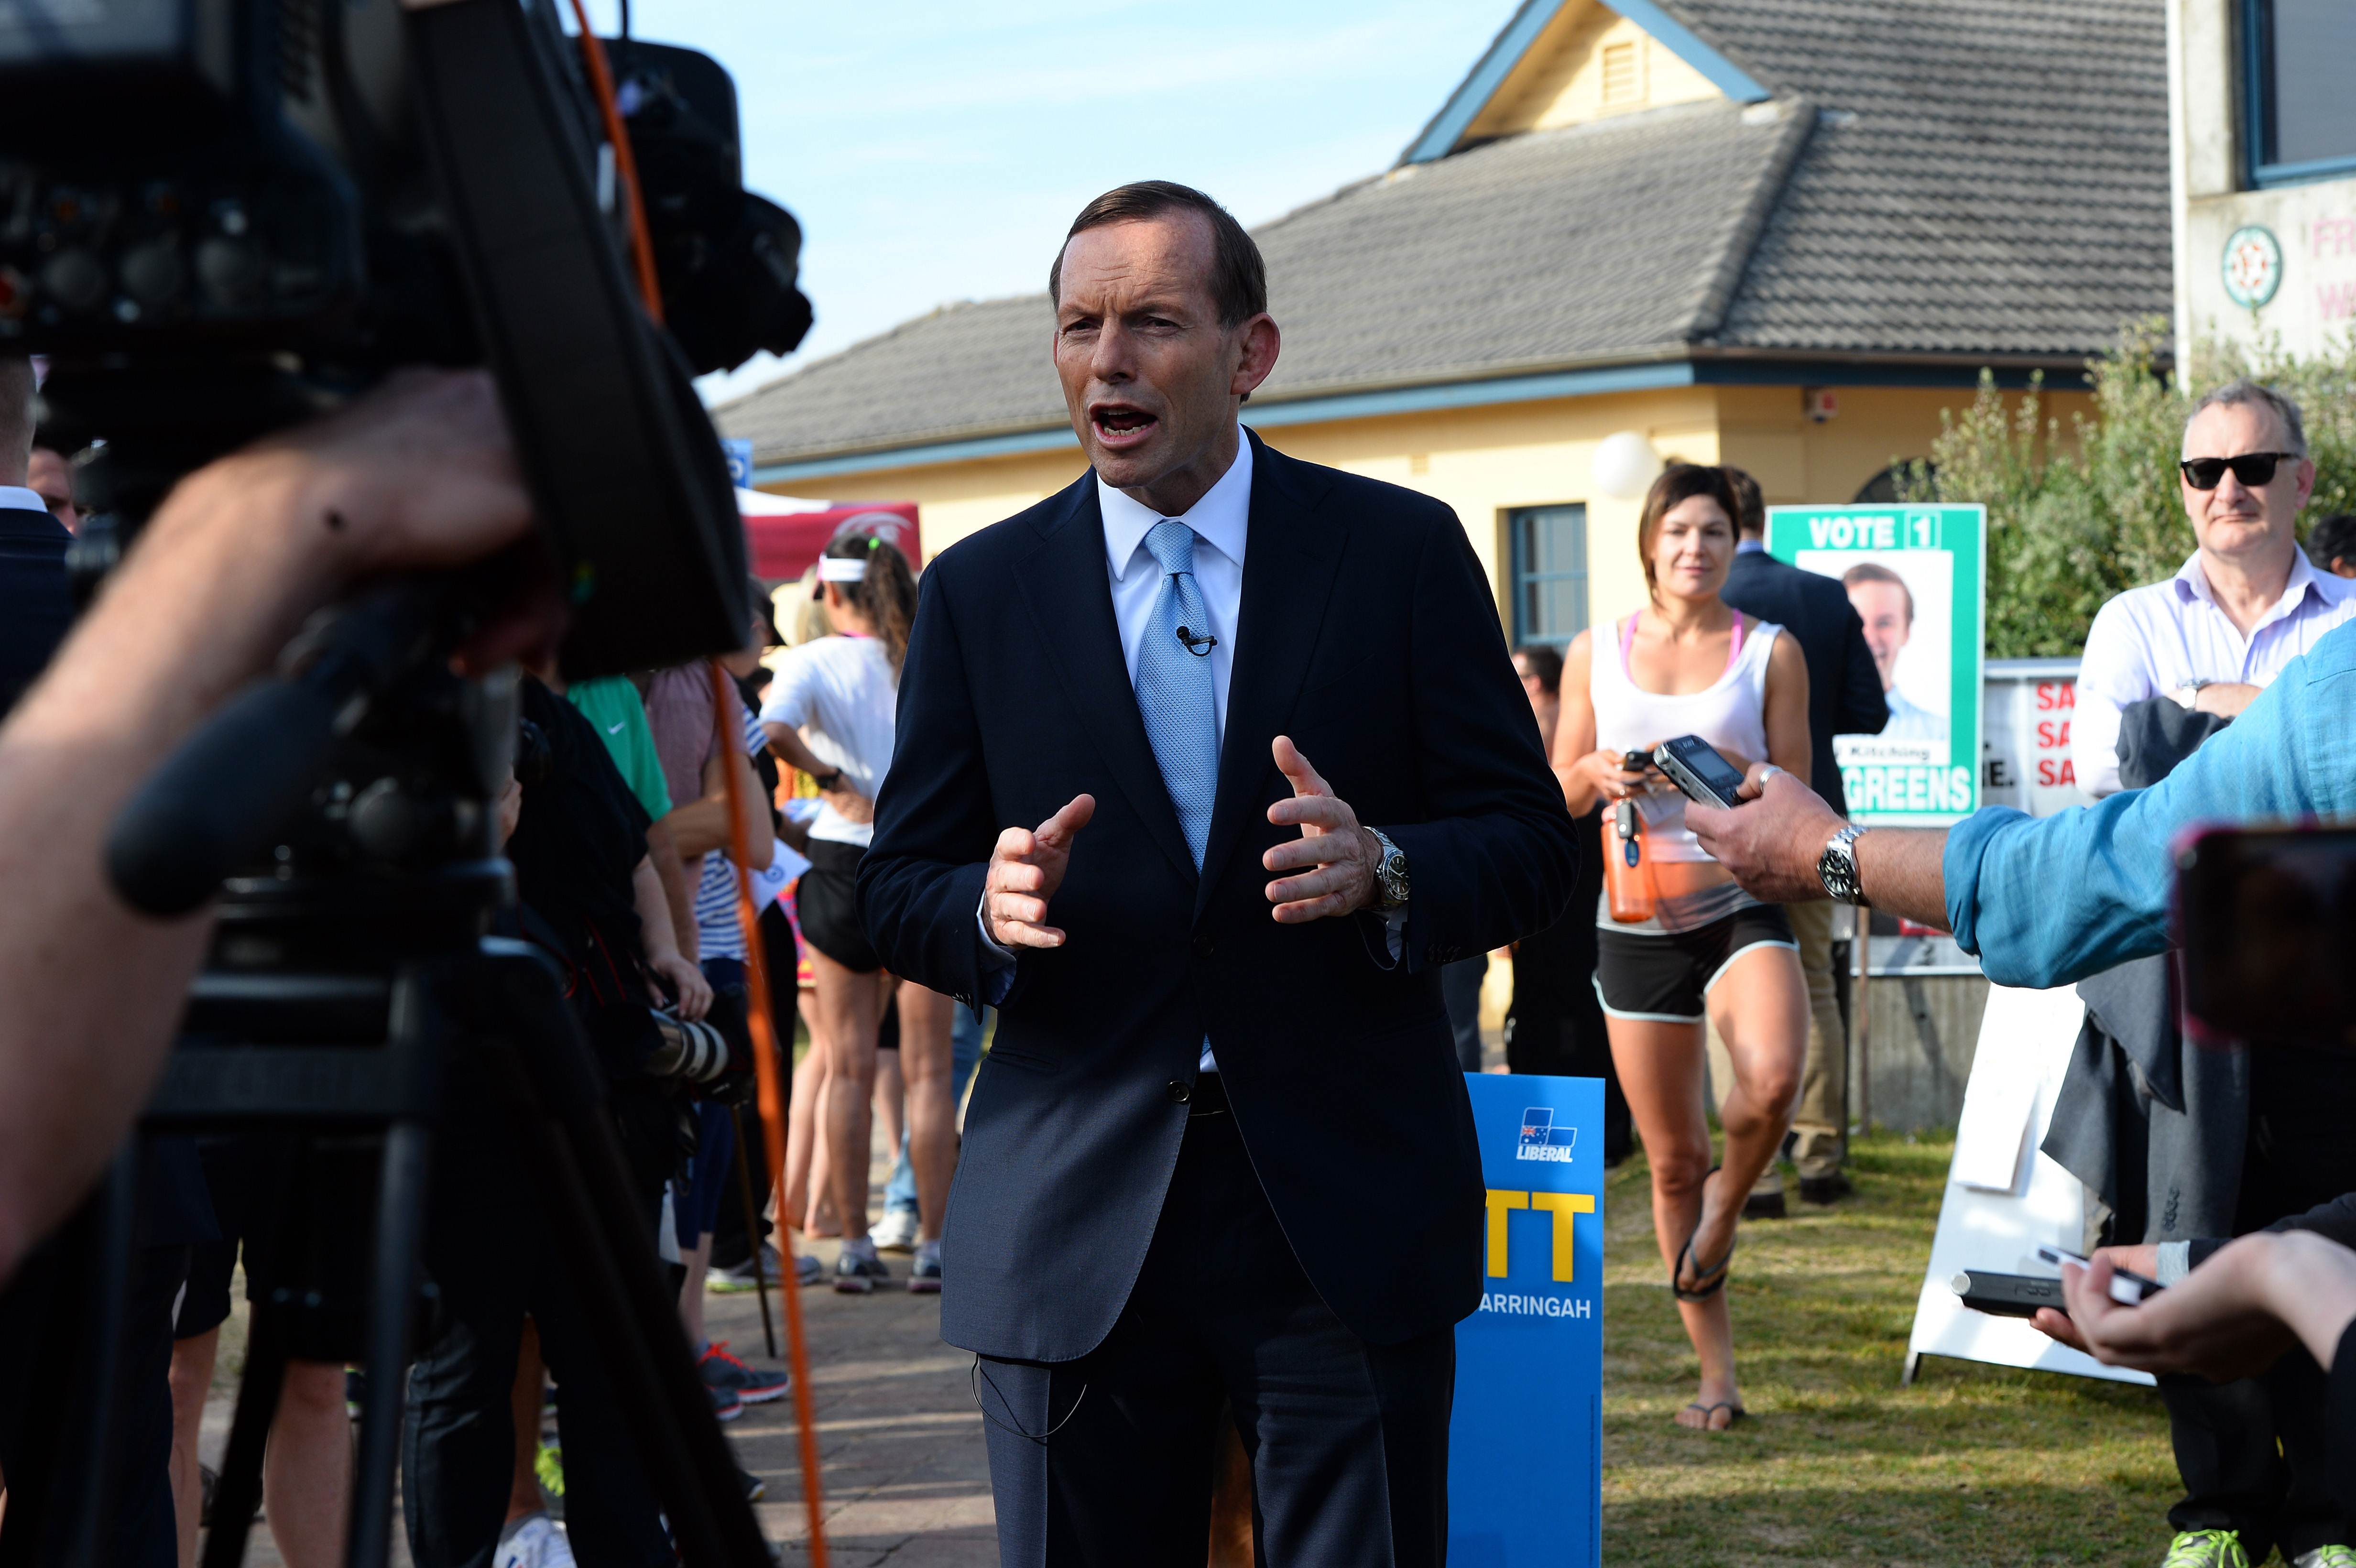  Australian opposition leader Tony Abbott speaks during a television interview after casting his vote in Sydney. Photo: AFP